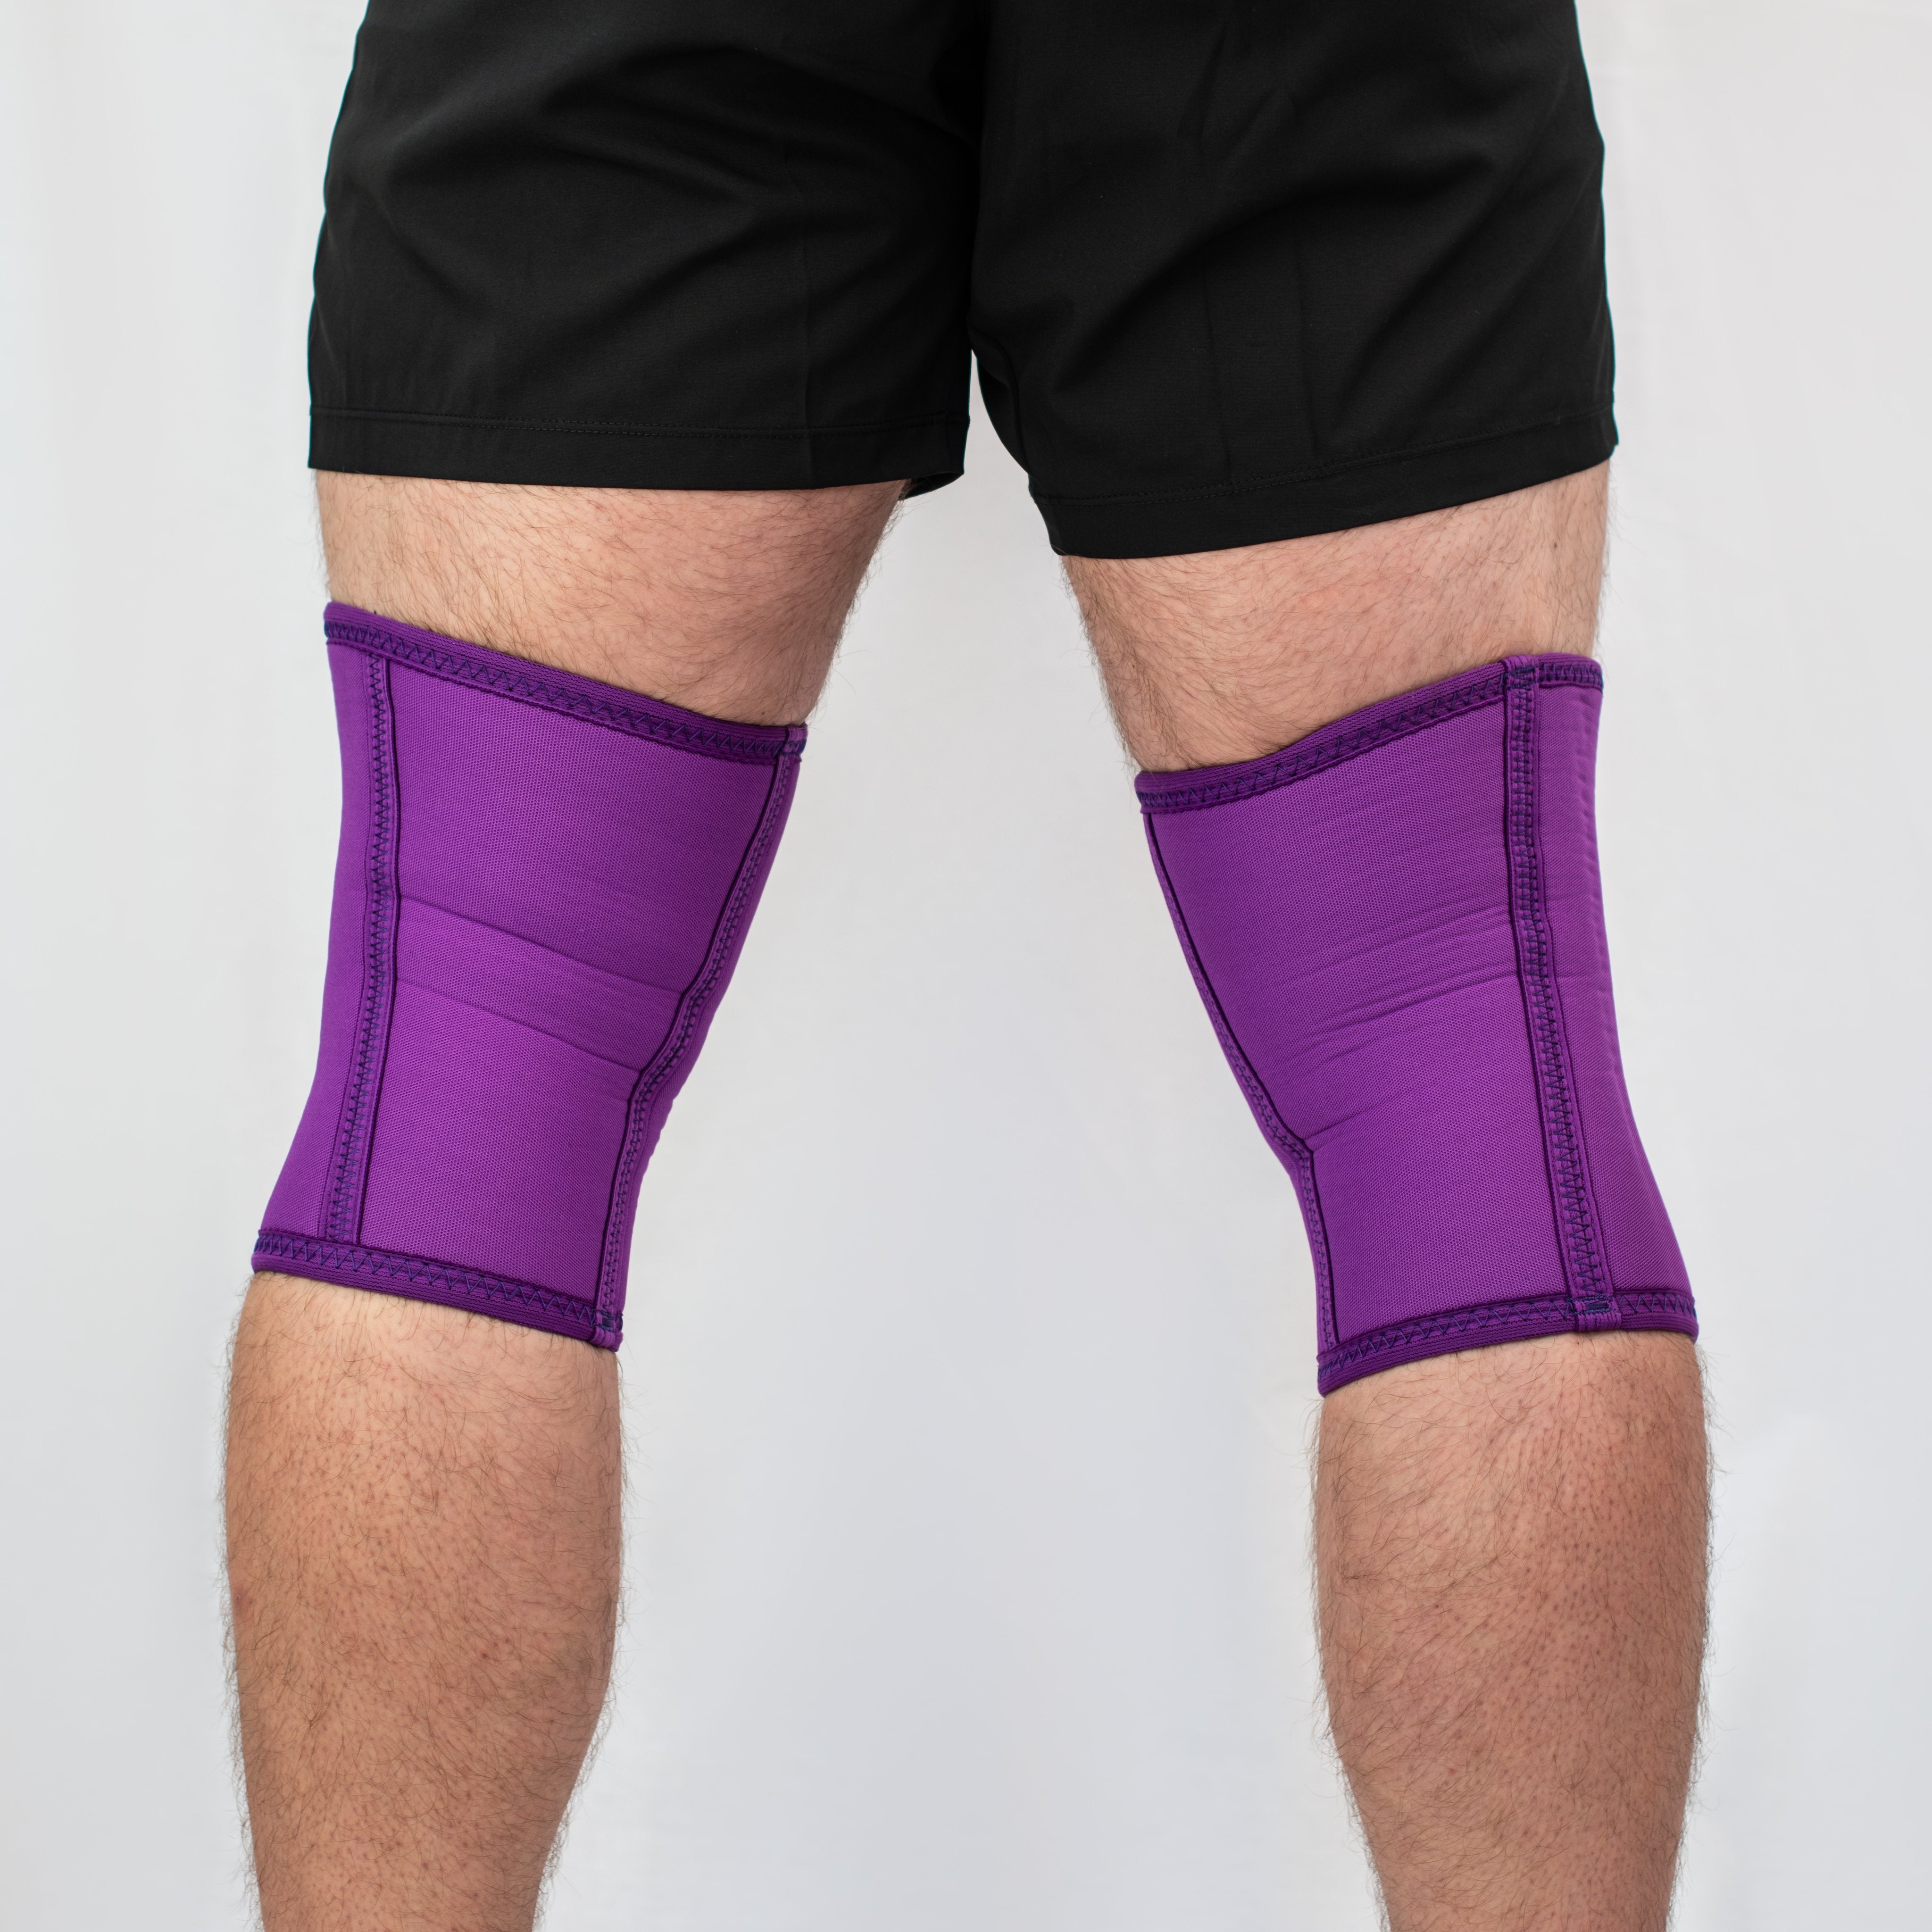 A7 IPF approved Purple CONE knee sleeves are structured with a downward cut panel on the back of the quad and calf to ensure ultimate compression at the knee joint. A7 CONE knee sleeves are IPF approved for use in all powerlifting competitions. A7 CONE Knee Sleeves are IPF Approved Kit. A7 cone knee sleeves are made with high quality neoprene and the knee sleeves are sold as a pair. The double seam on the knee sleeves create a greater tension on the knee joint. A7 UK shipping to UK and Europe. 